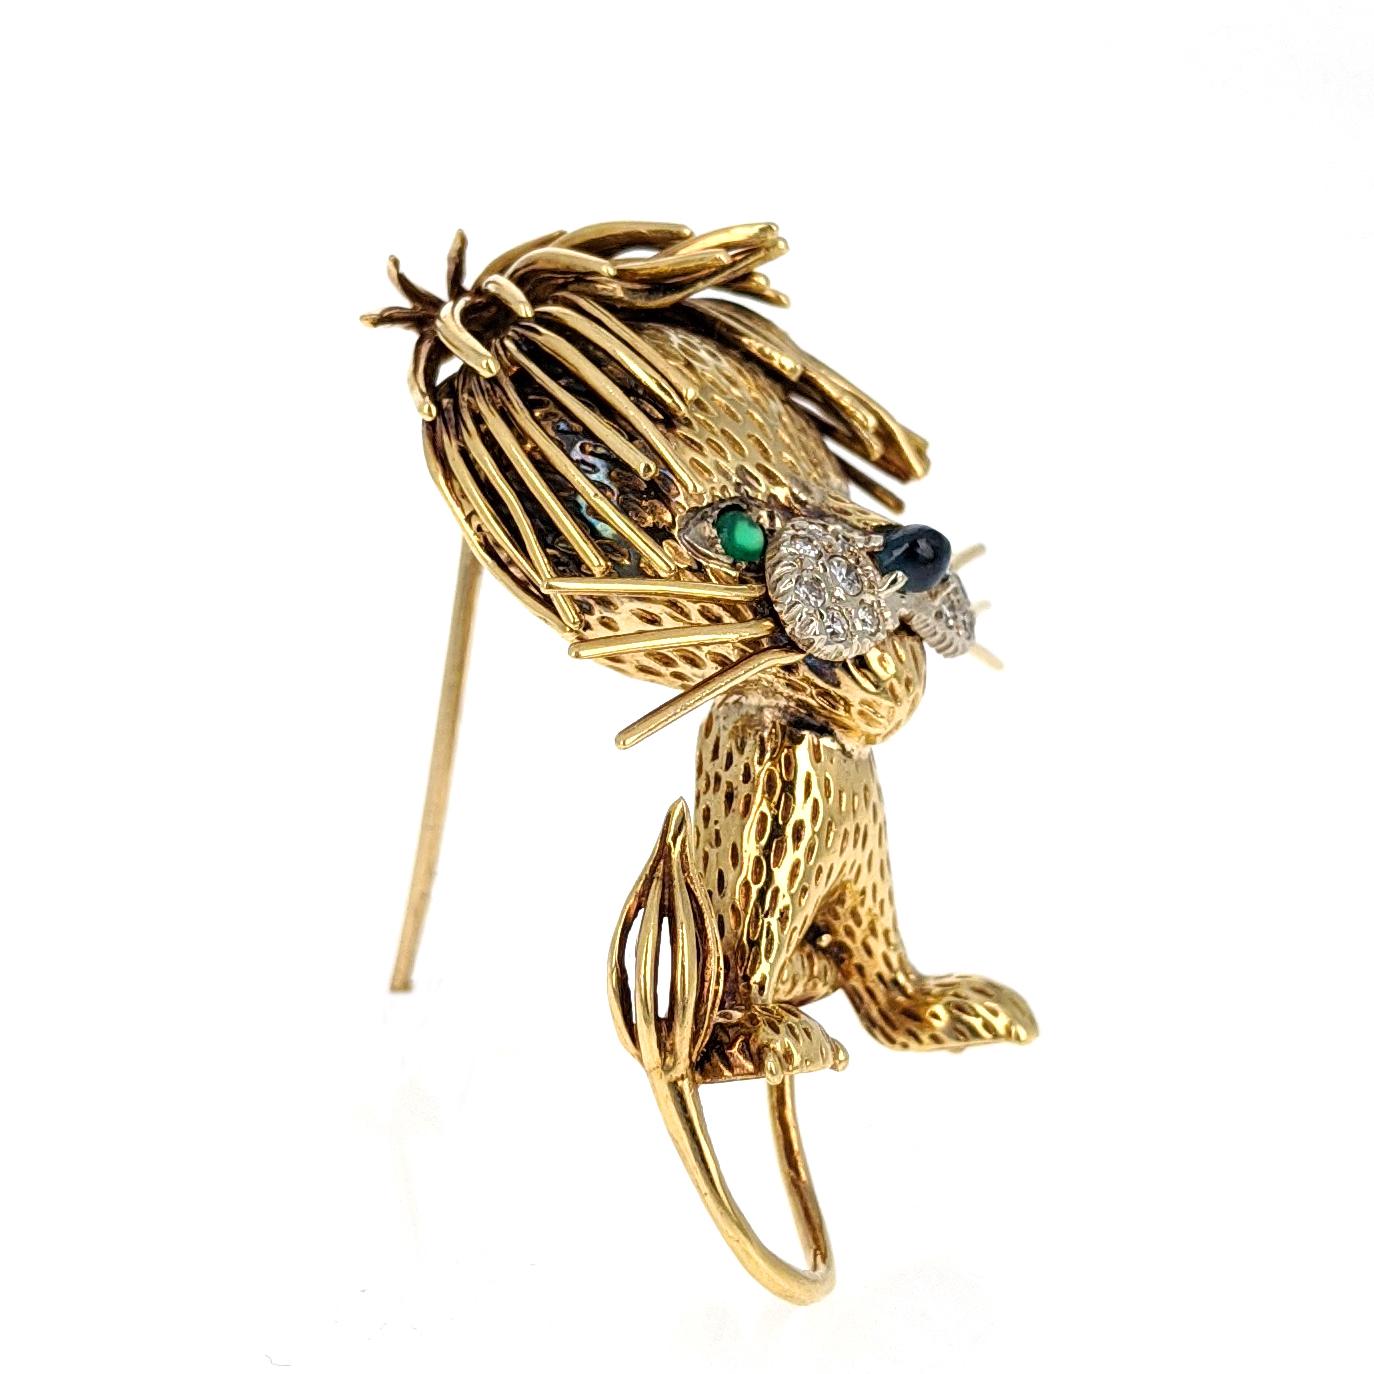 This cute lion brooch is expertly crafted in 18 karat yellow gold and features a sapphire cabochon nose accented by twelve single-cut diamonds and two round emerald eyes. It is marked 18K KIRI. Measures approximately 1.75 inches tall. 

This little